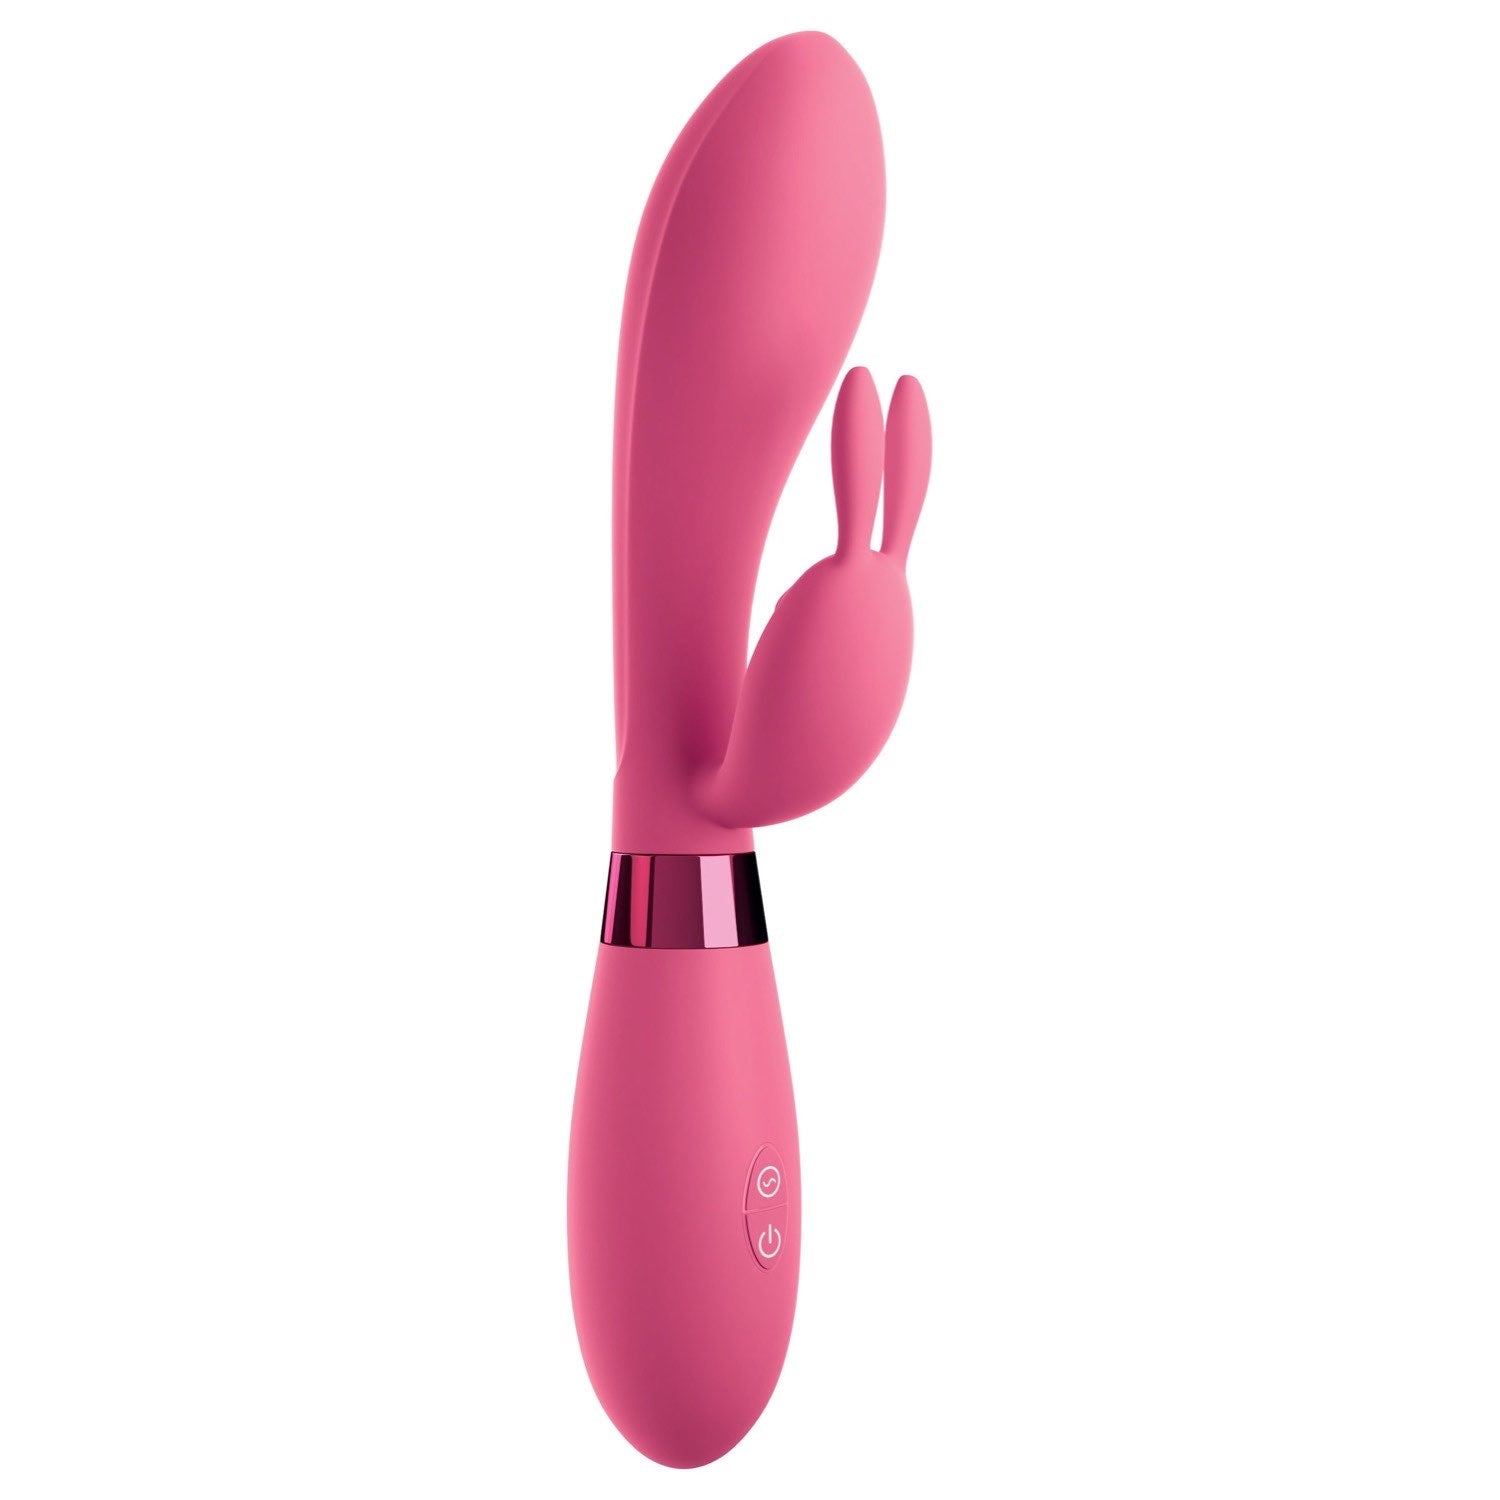 Omg! OMG! Rabbits #Selfie - Pink Rabbit Vibrator by Pipedream